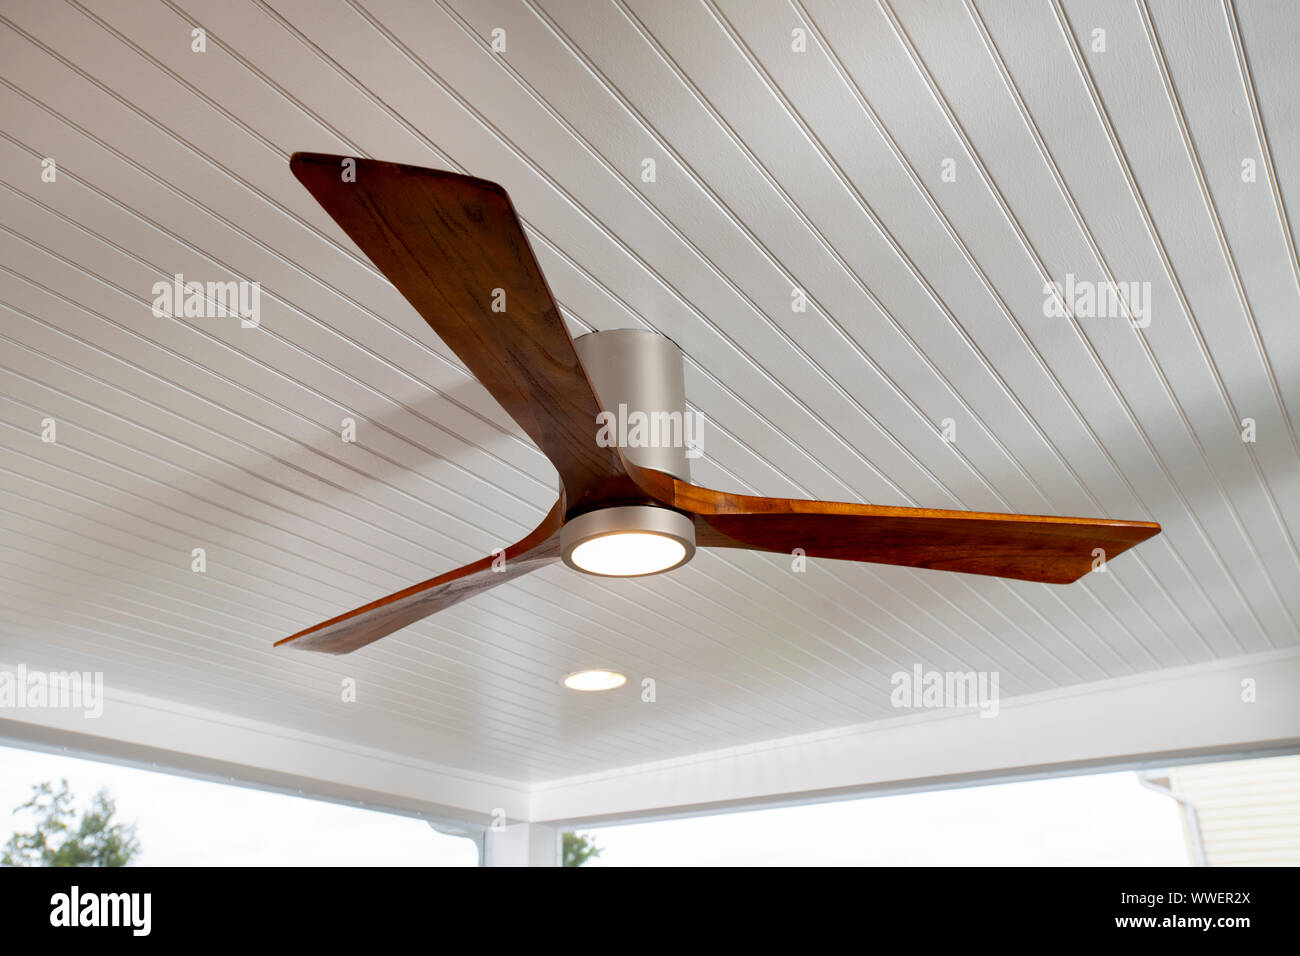 A wood three blade ceiling fan on a porch to cool the area living space Stock Photo